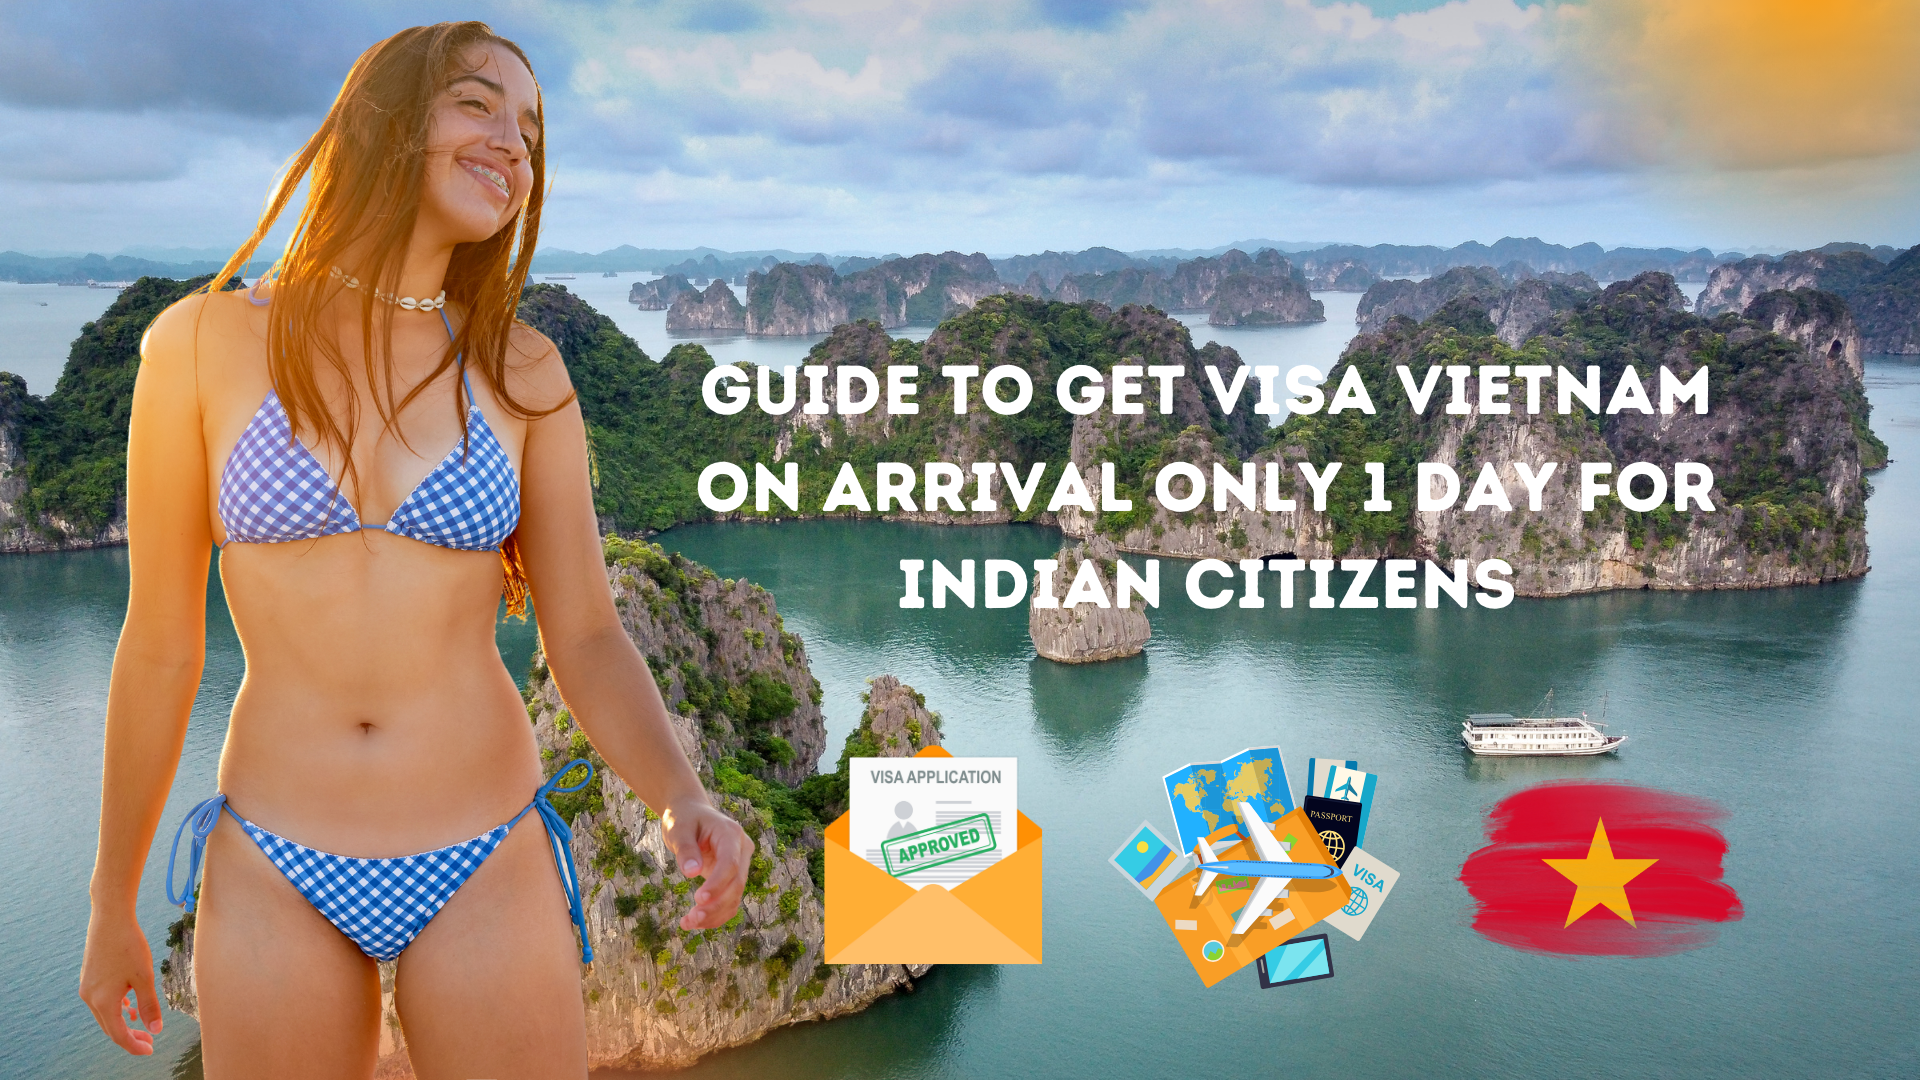 Guide to Get Visa Vietnam on Arrival Only 1 Day for Indian Citizens